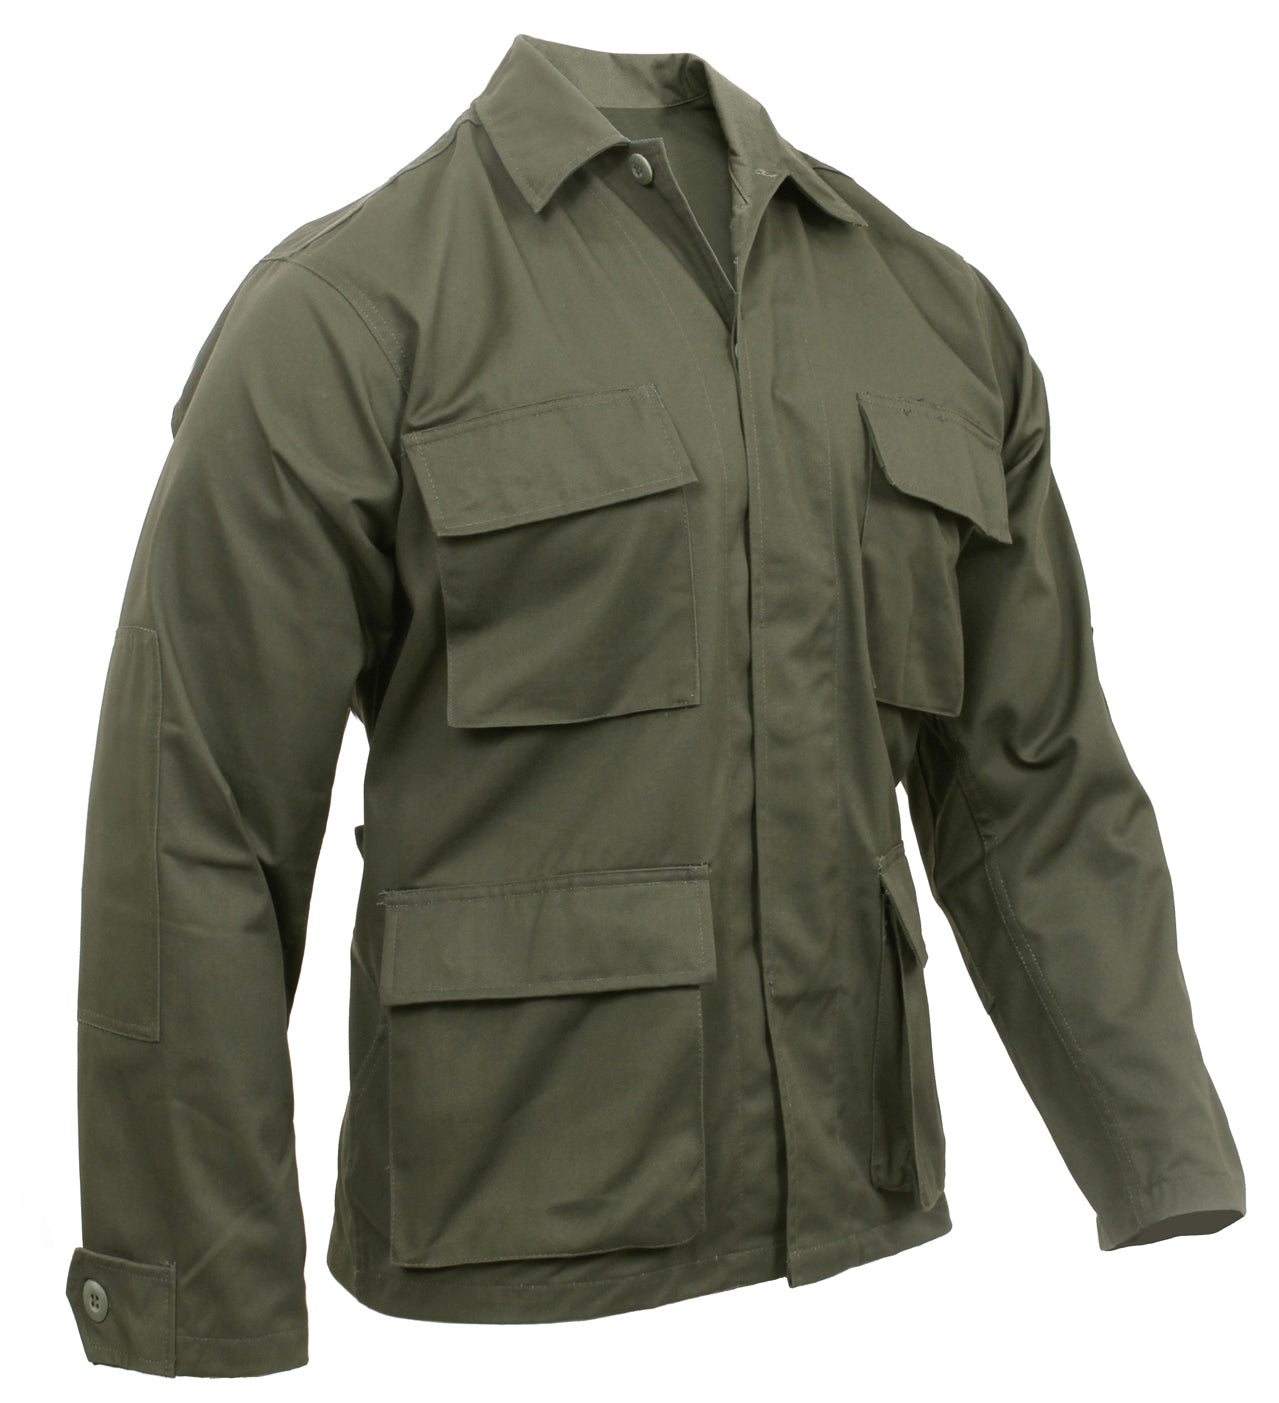 Milspec Poly/Cotton Twill Solid BDU Shirts Big & Tall Shirts MilTac Tactical Military Outdoor Gear Australia